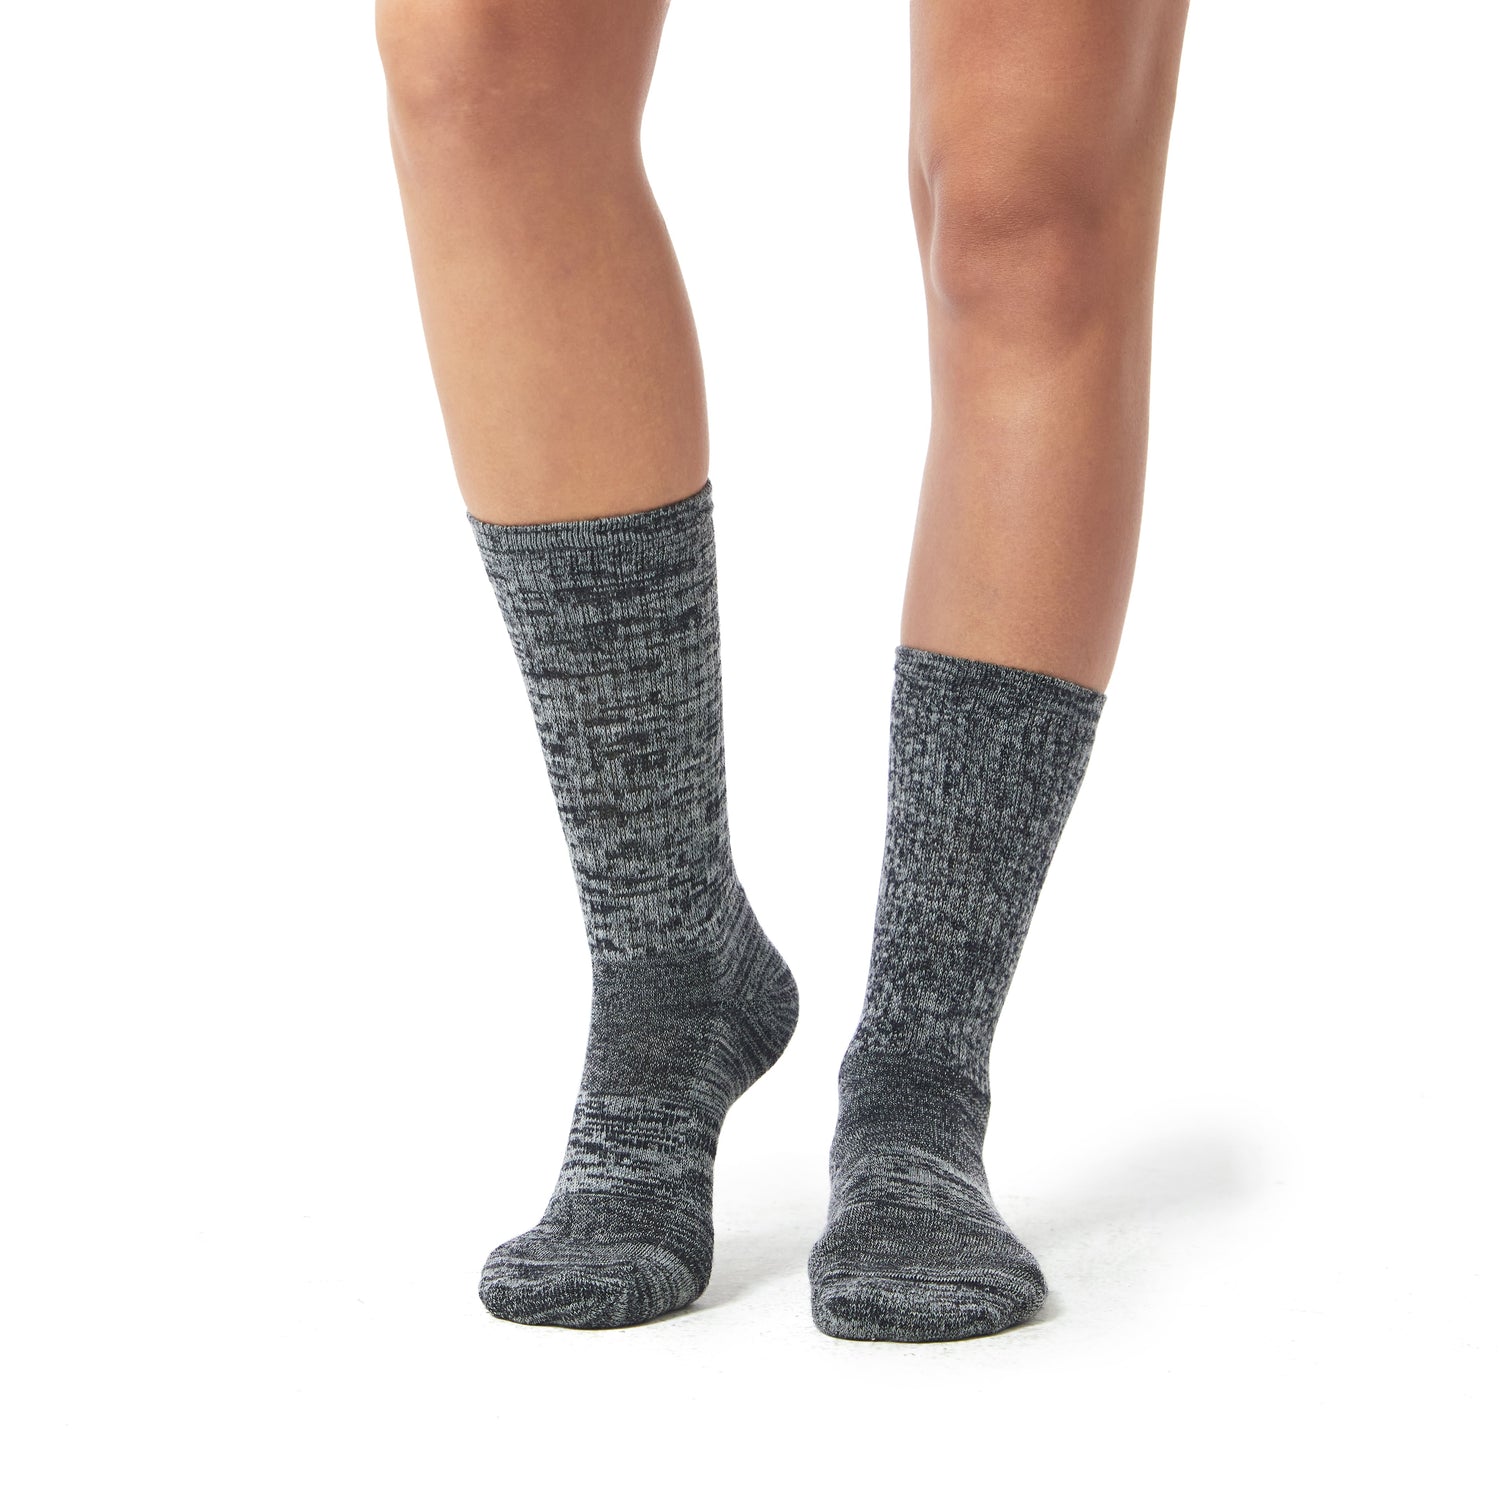 Designed for extreme weather and outdoor activities, our wool socks will keep your feet warm and comfortable in any condition.-1